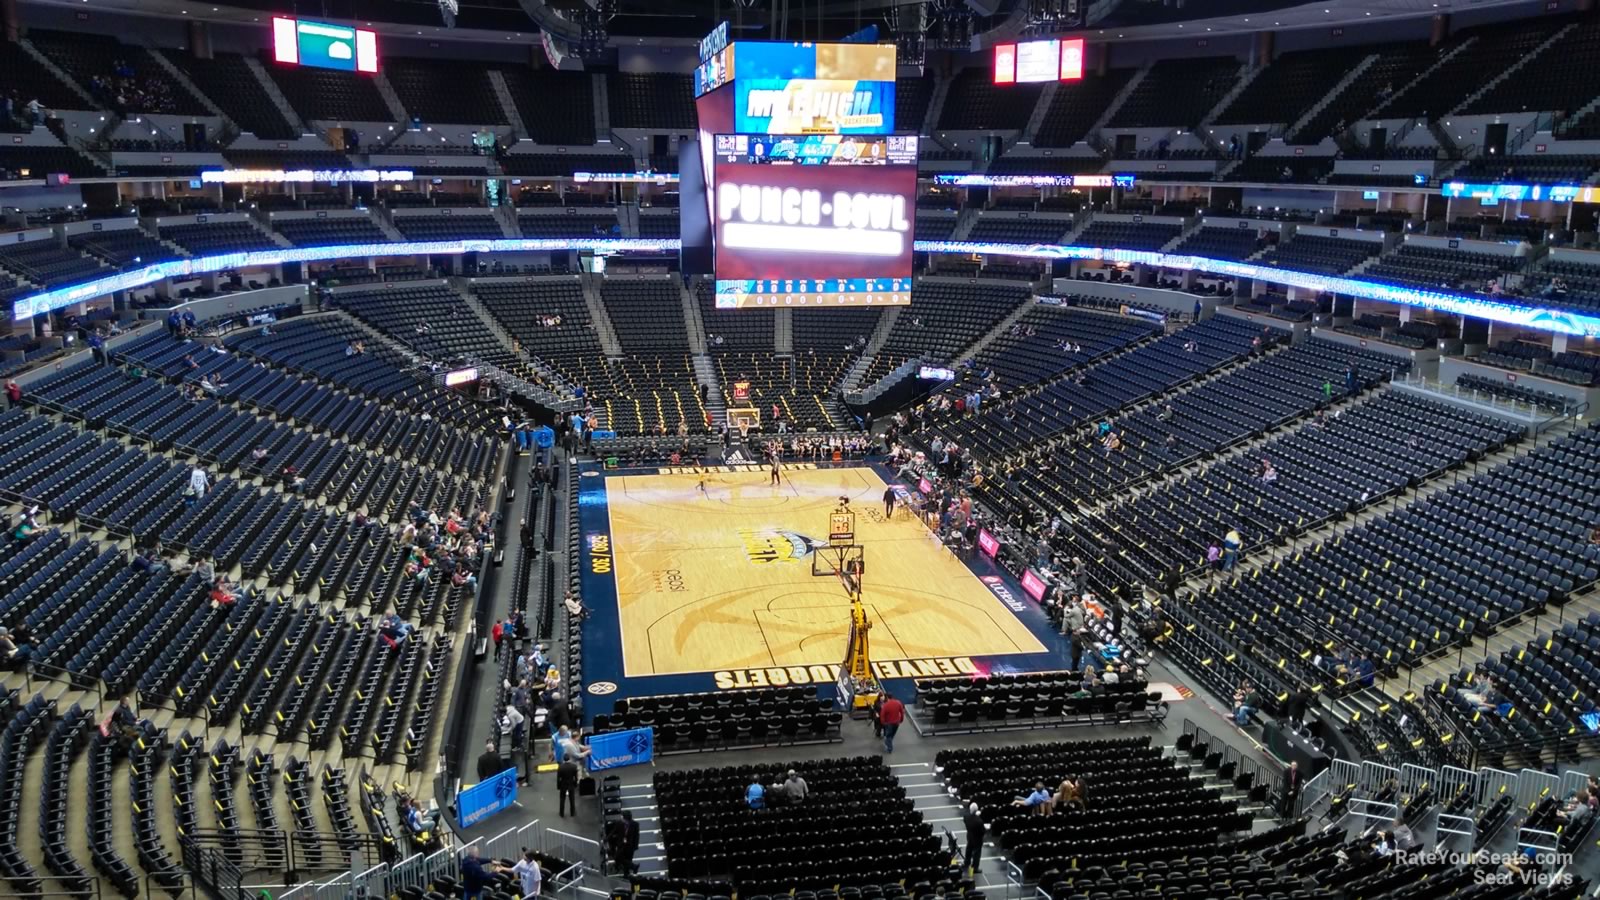 section 323, row 1 seat view  for basketball - ball arena